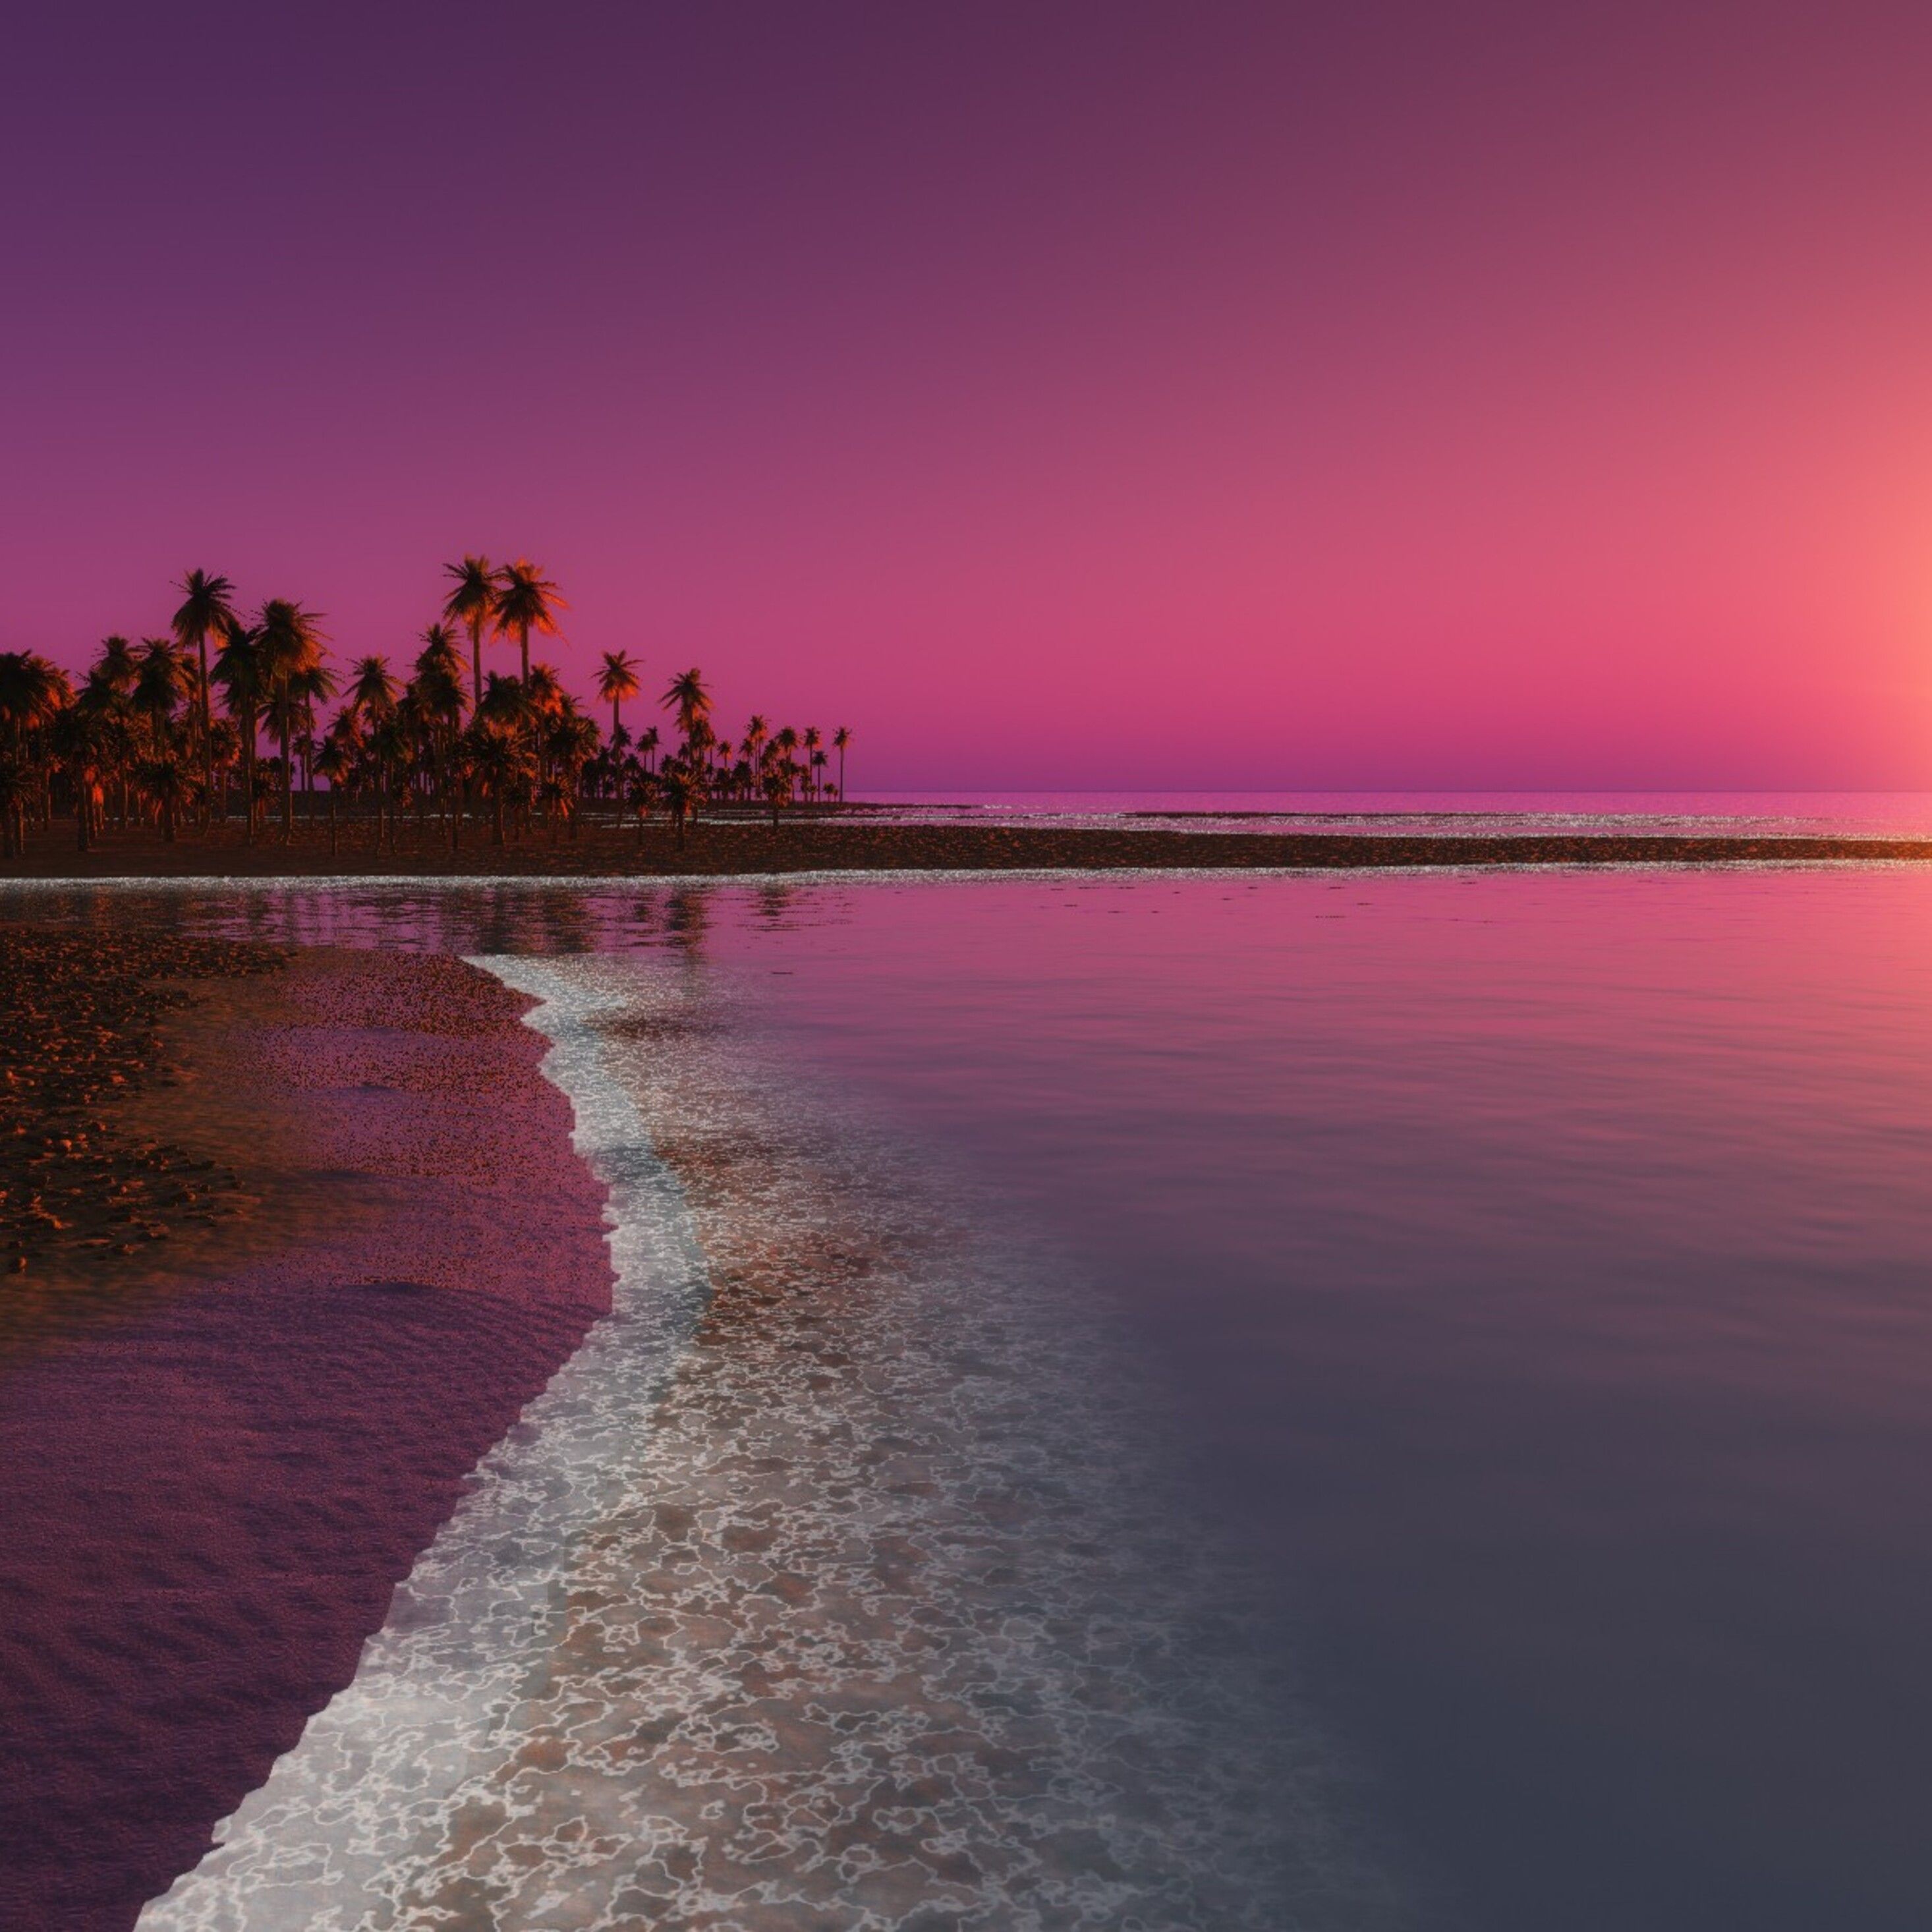 A beautiful beach sunset with palm trees in the distance. - Coast